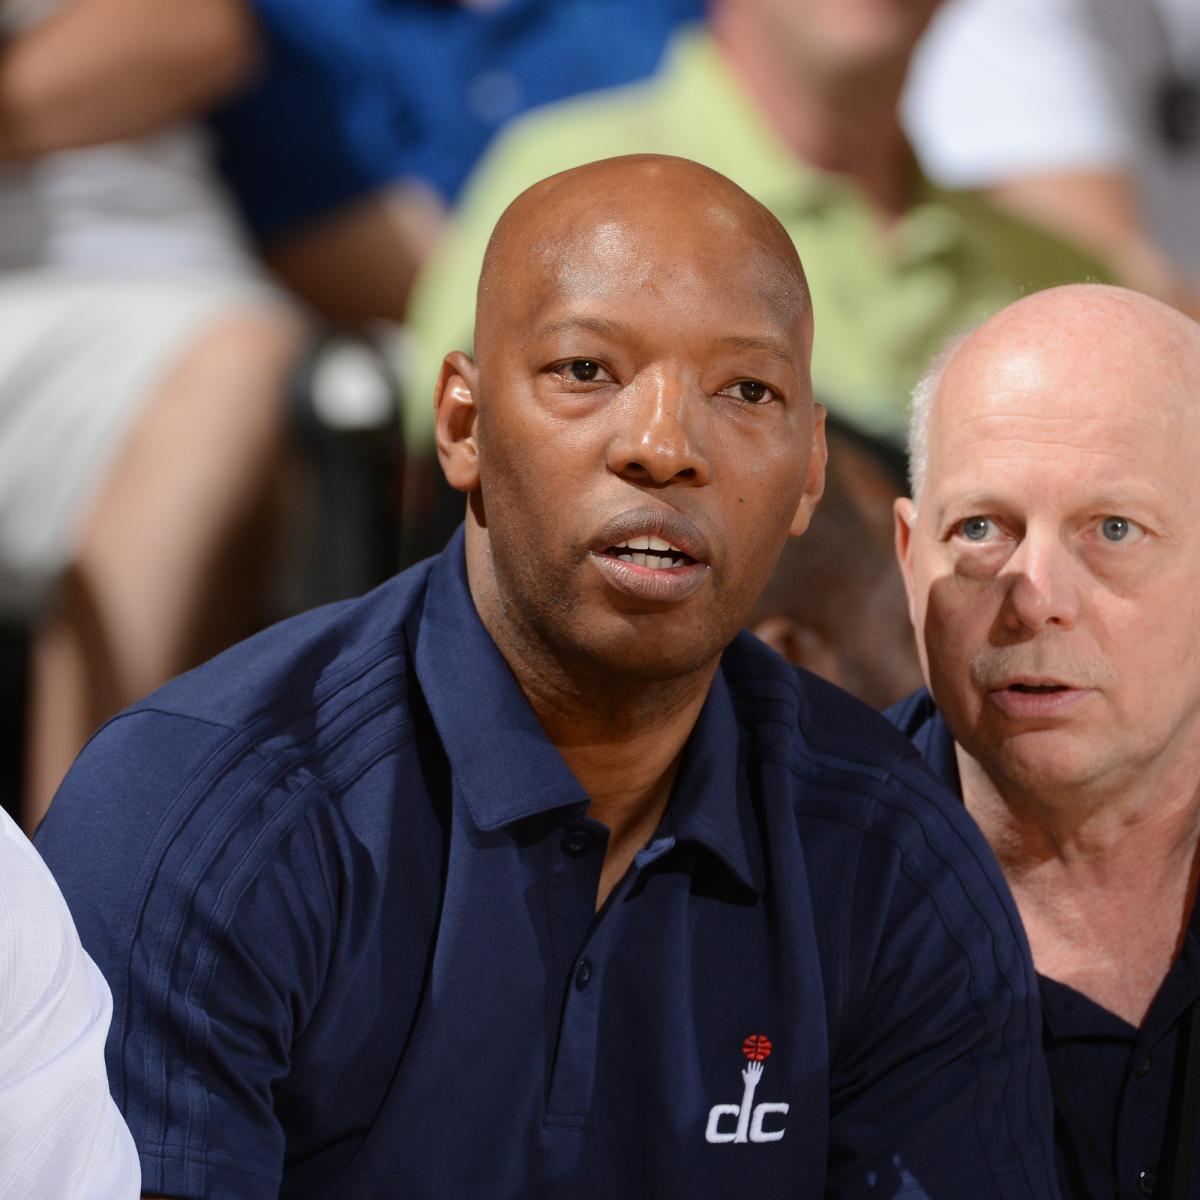 Here's the story behind that Sam Cassell 'Big Balls' dance - The